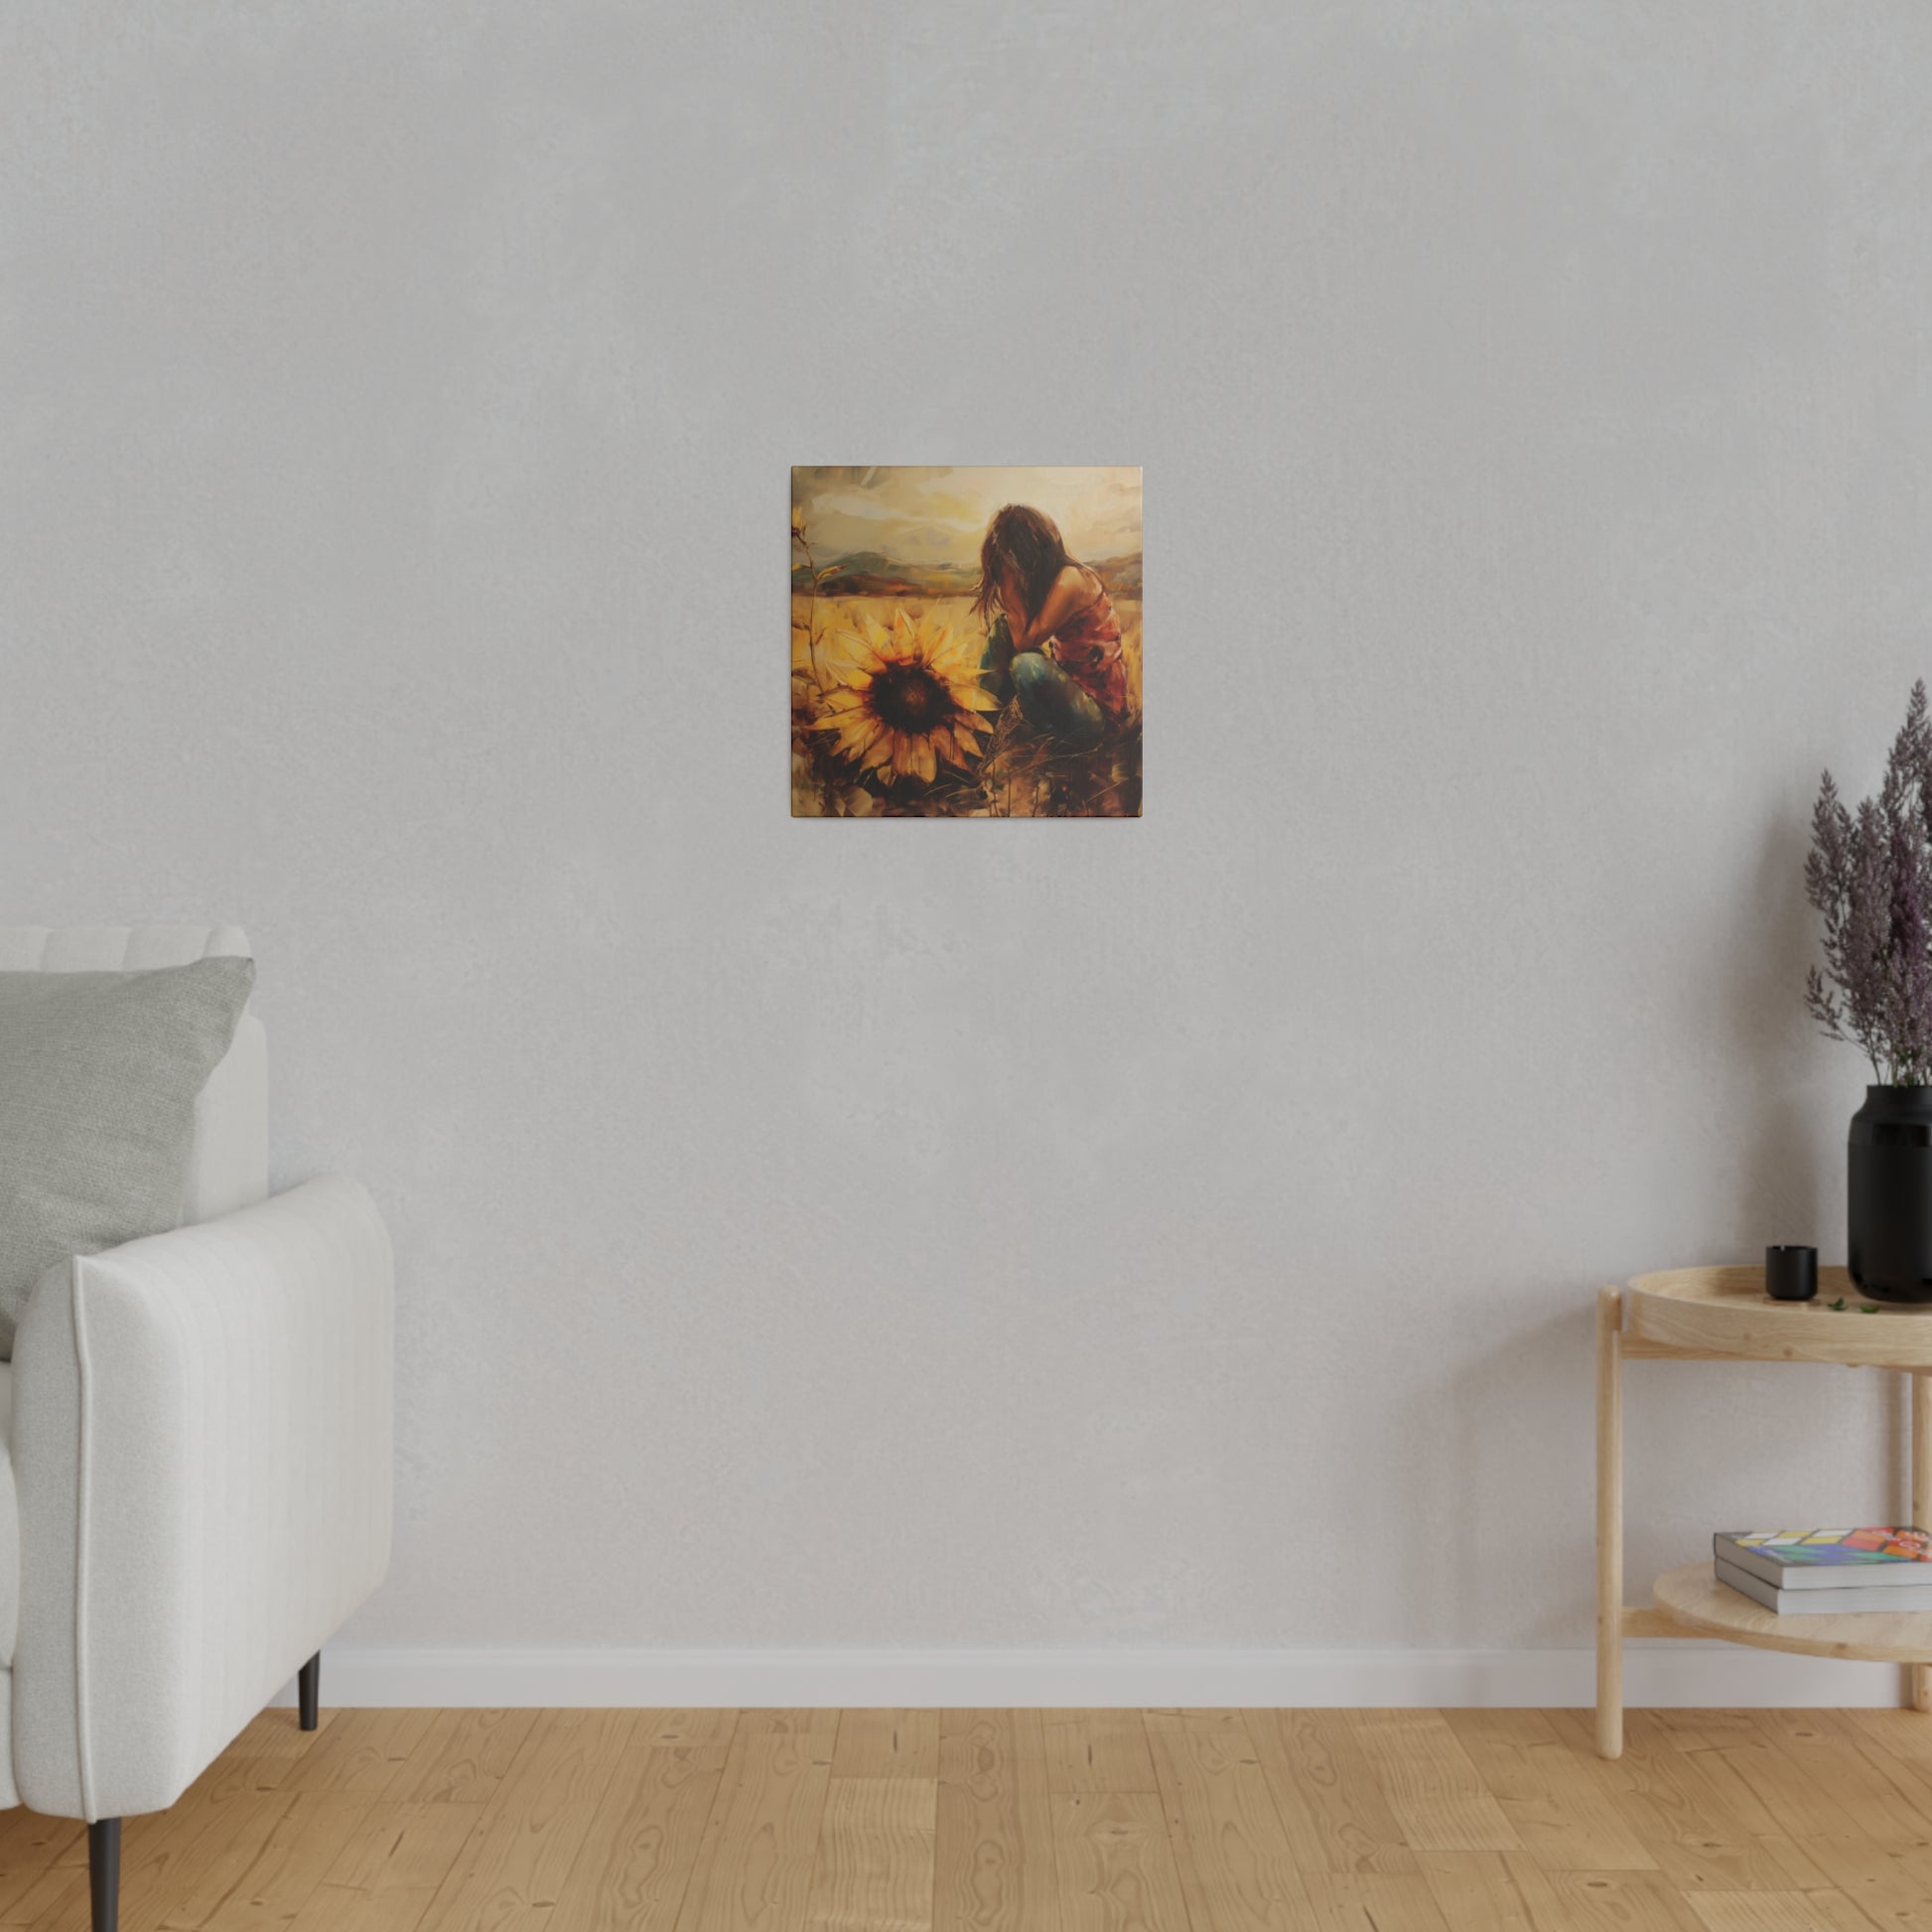 A framed Elena Duval: Solace in Solitude exclusive canvas print of a person among sunflowers, capturing the human experience, is hung on a plain wall in a minimalist room.